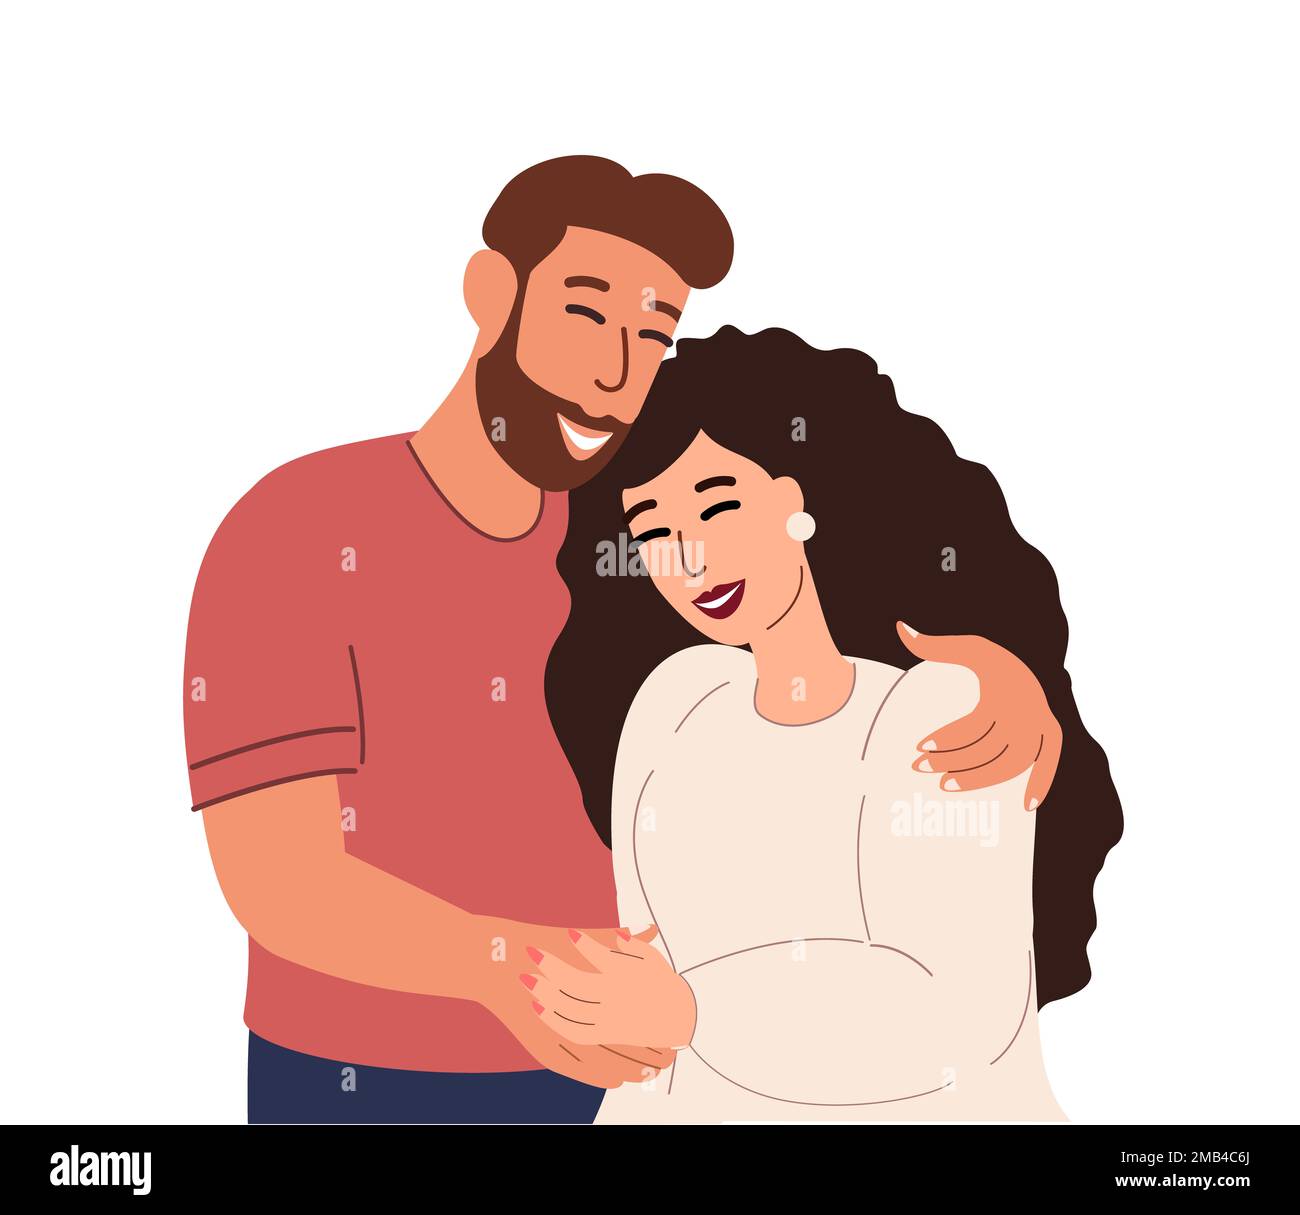 Happy Young Romantic Couple ,Husband hug each  ,Warm,loving  people trust,help to each   Love Stock Photo - Alamy